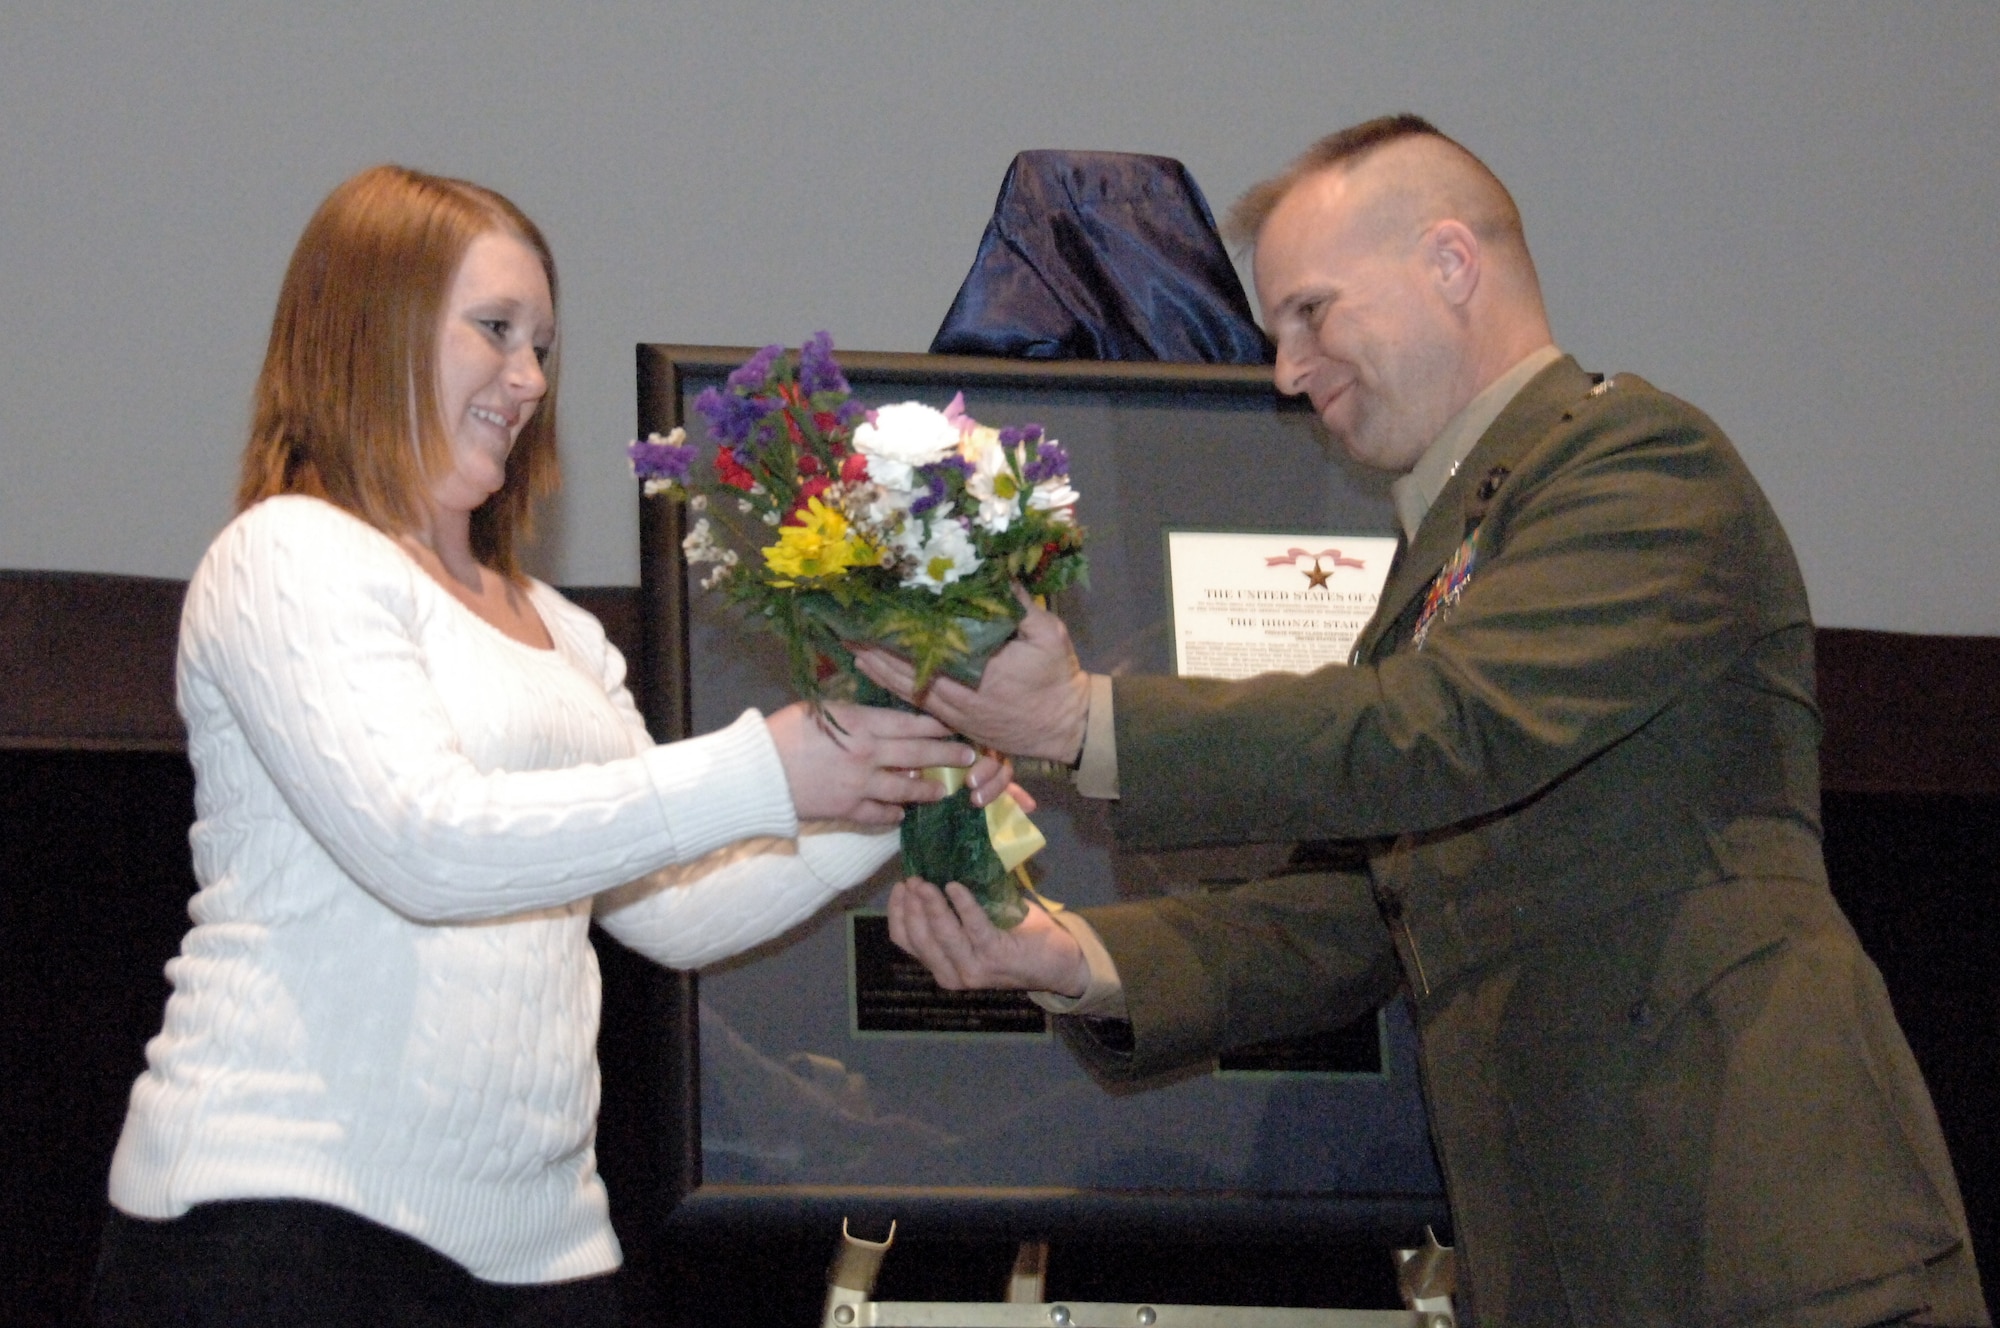 Army Lt. Col. Eric Garretty, the Montgomery Military Entrance Processing Station commander, presents flowers to Miranda Bicknell, widow of Pfc. Stephen Bicknell, during a ceremony at the Senior Non-Commissioned Officer Academy here Feb. 20. A native of Prattville, Ala., Private Bicknell died while serving in Iraq in October 2006. (Air Force photo by Donna Burnett)